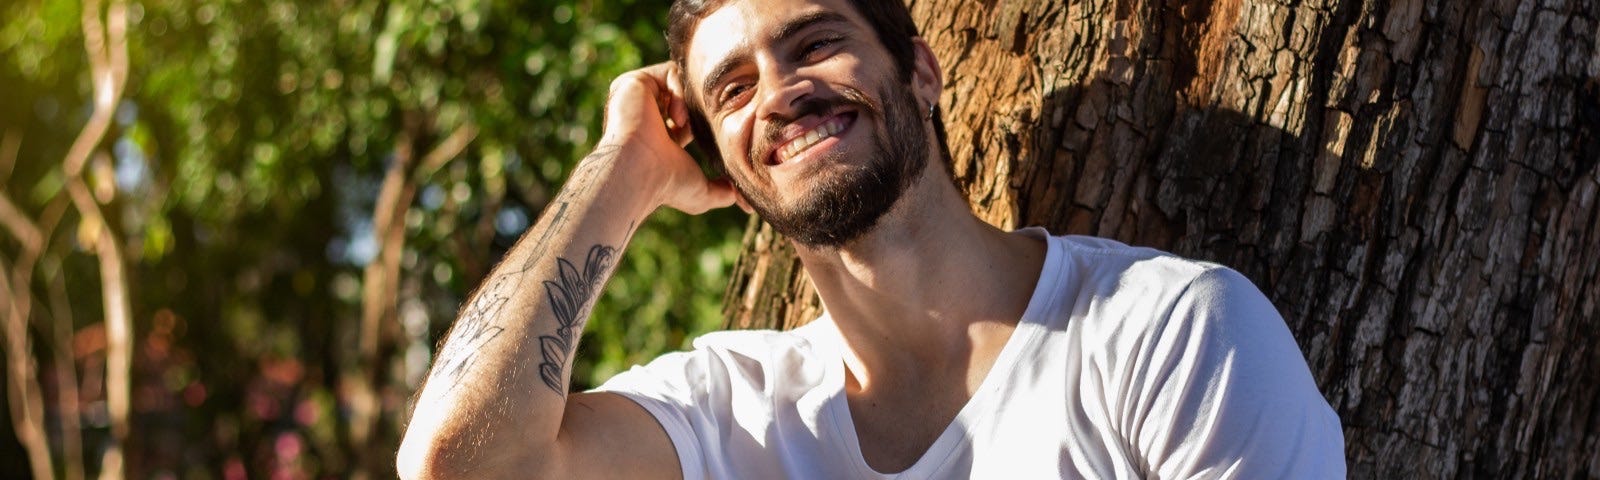 Smiling young man with a tattoed forearm sitting in the sun